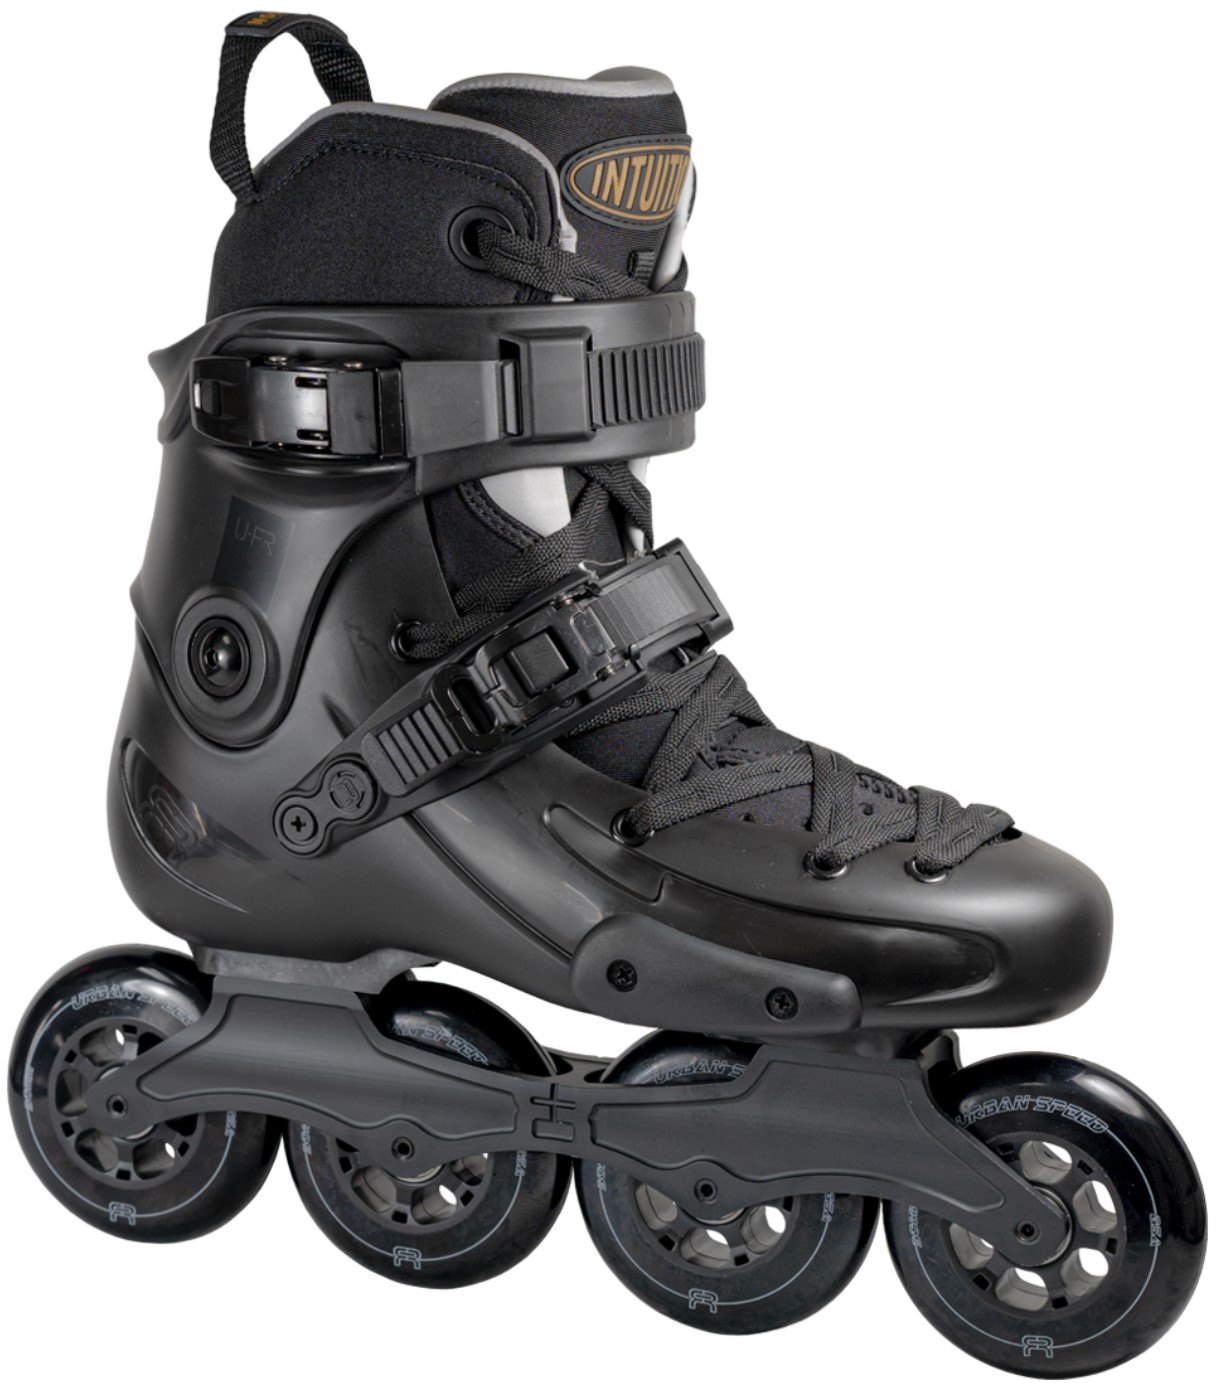 black FR inline skate UFR 90 with INTUITION liner with four wheels of 90 mm